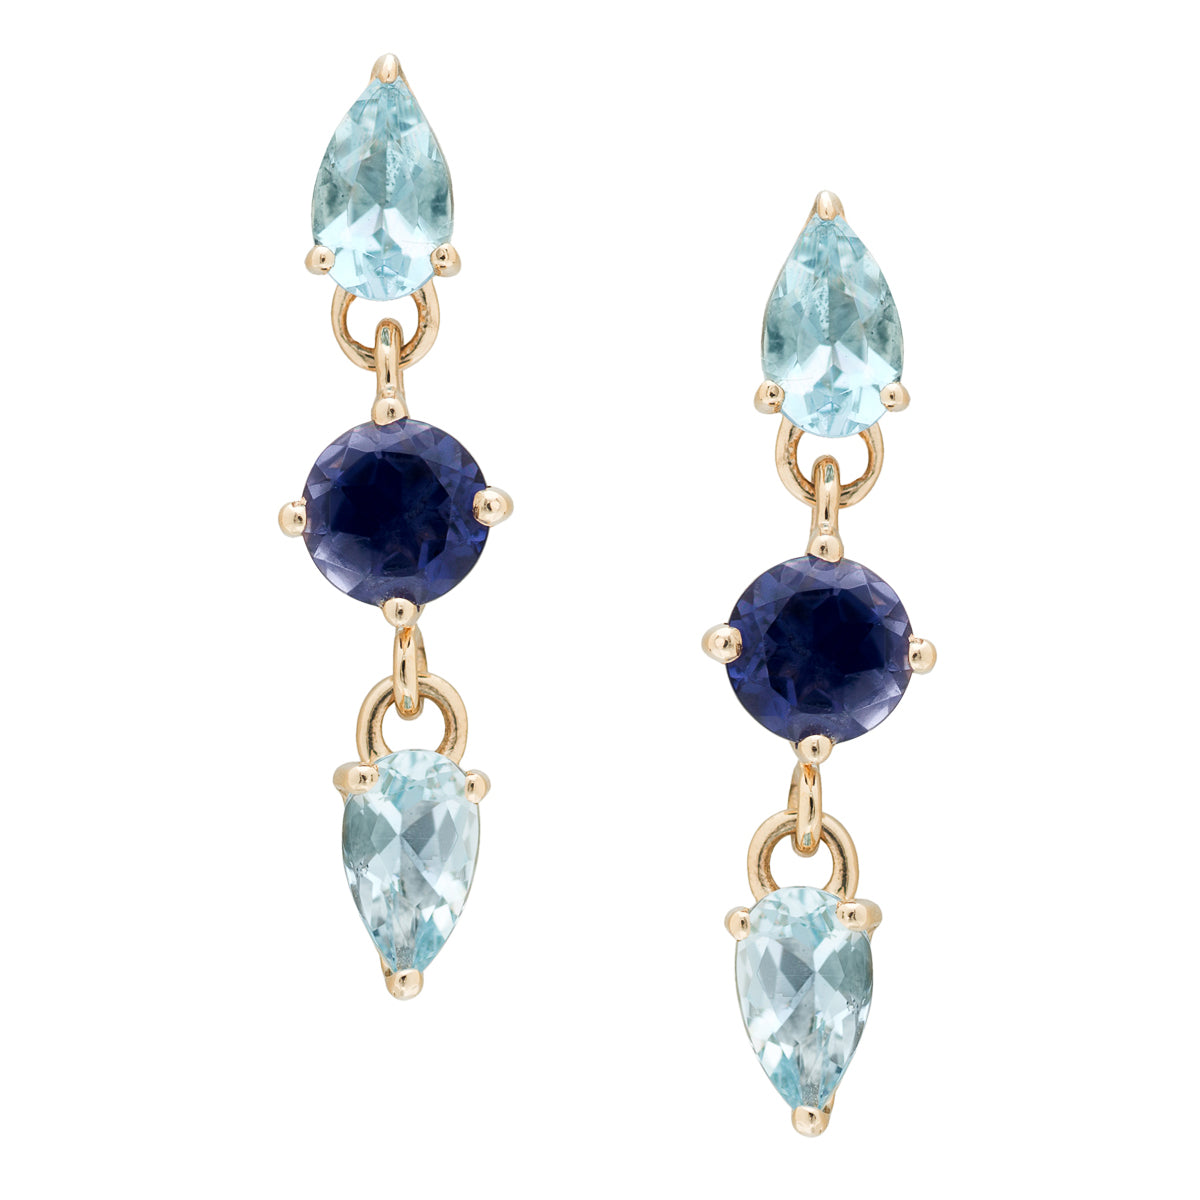 IRINI  Triple Gem Drop earring in 14k gold with iolite and light blue topaz gemstone, simple, delicate perfection